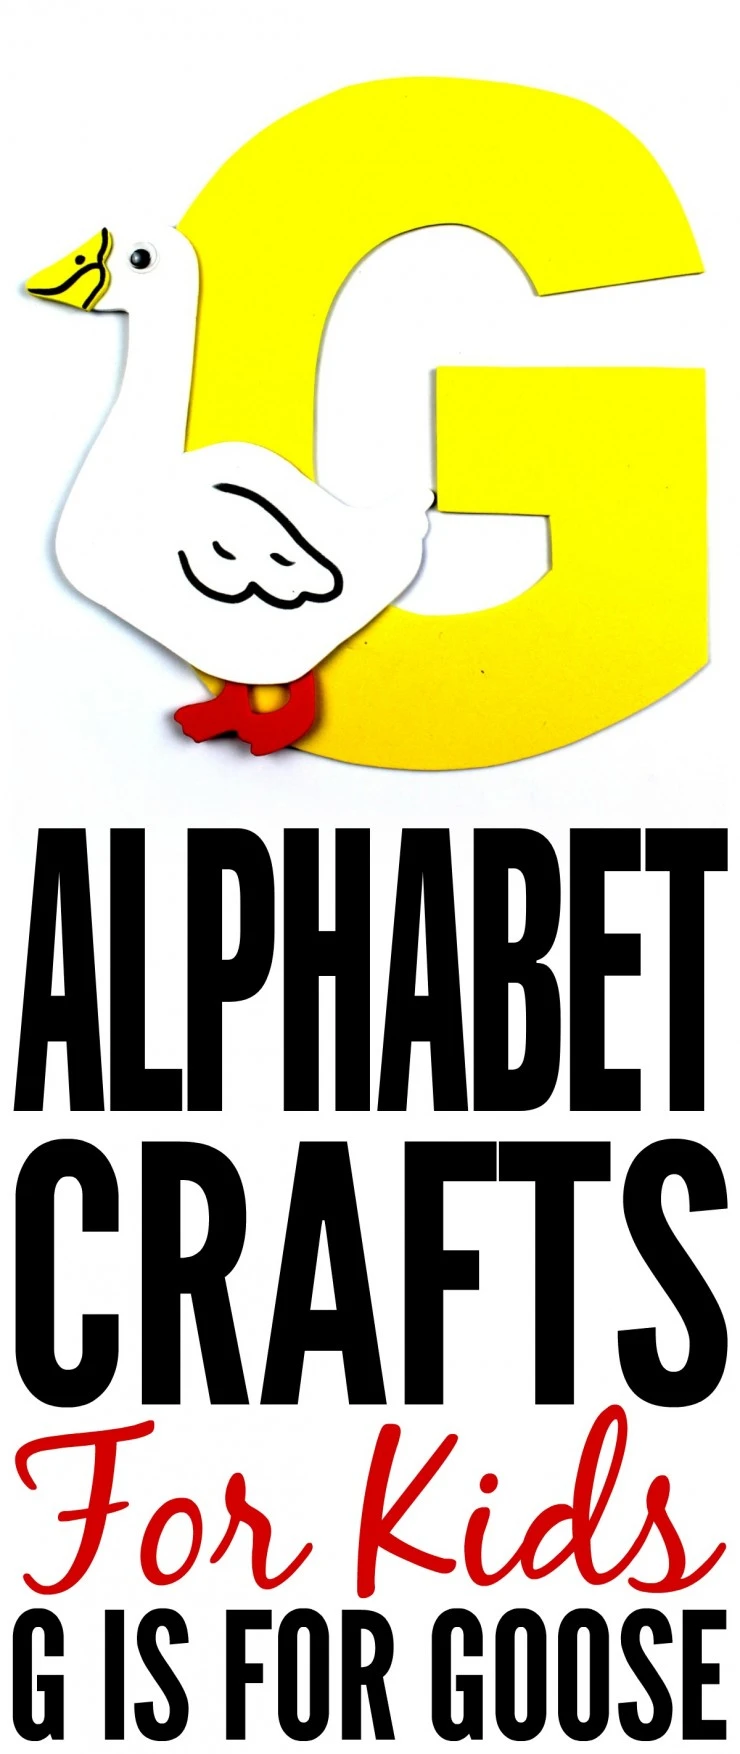 This week is my series of ABCs kids crafts featuring the Alphabet, we are doing a G is for Goose craft. These Alphabet Crafts For Kids are a fun way to introduce your child to the alphabet.